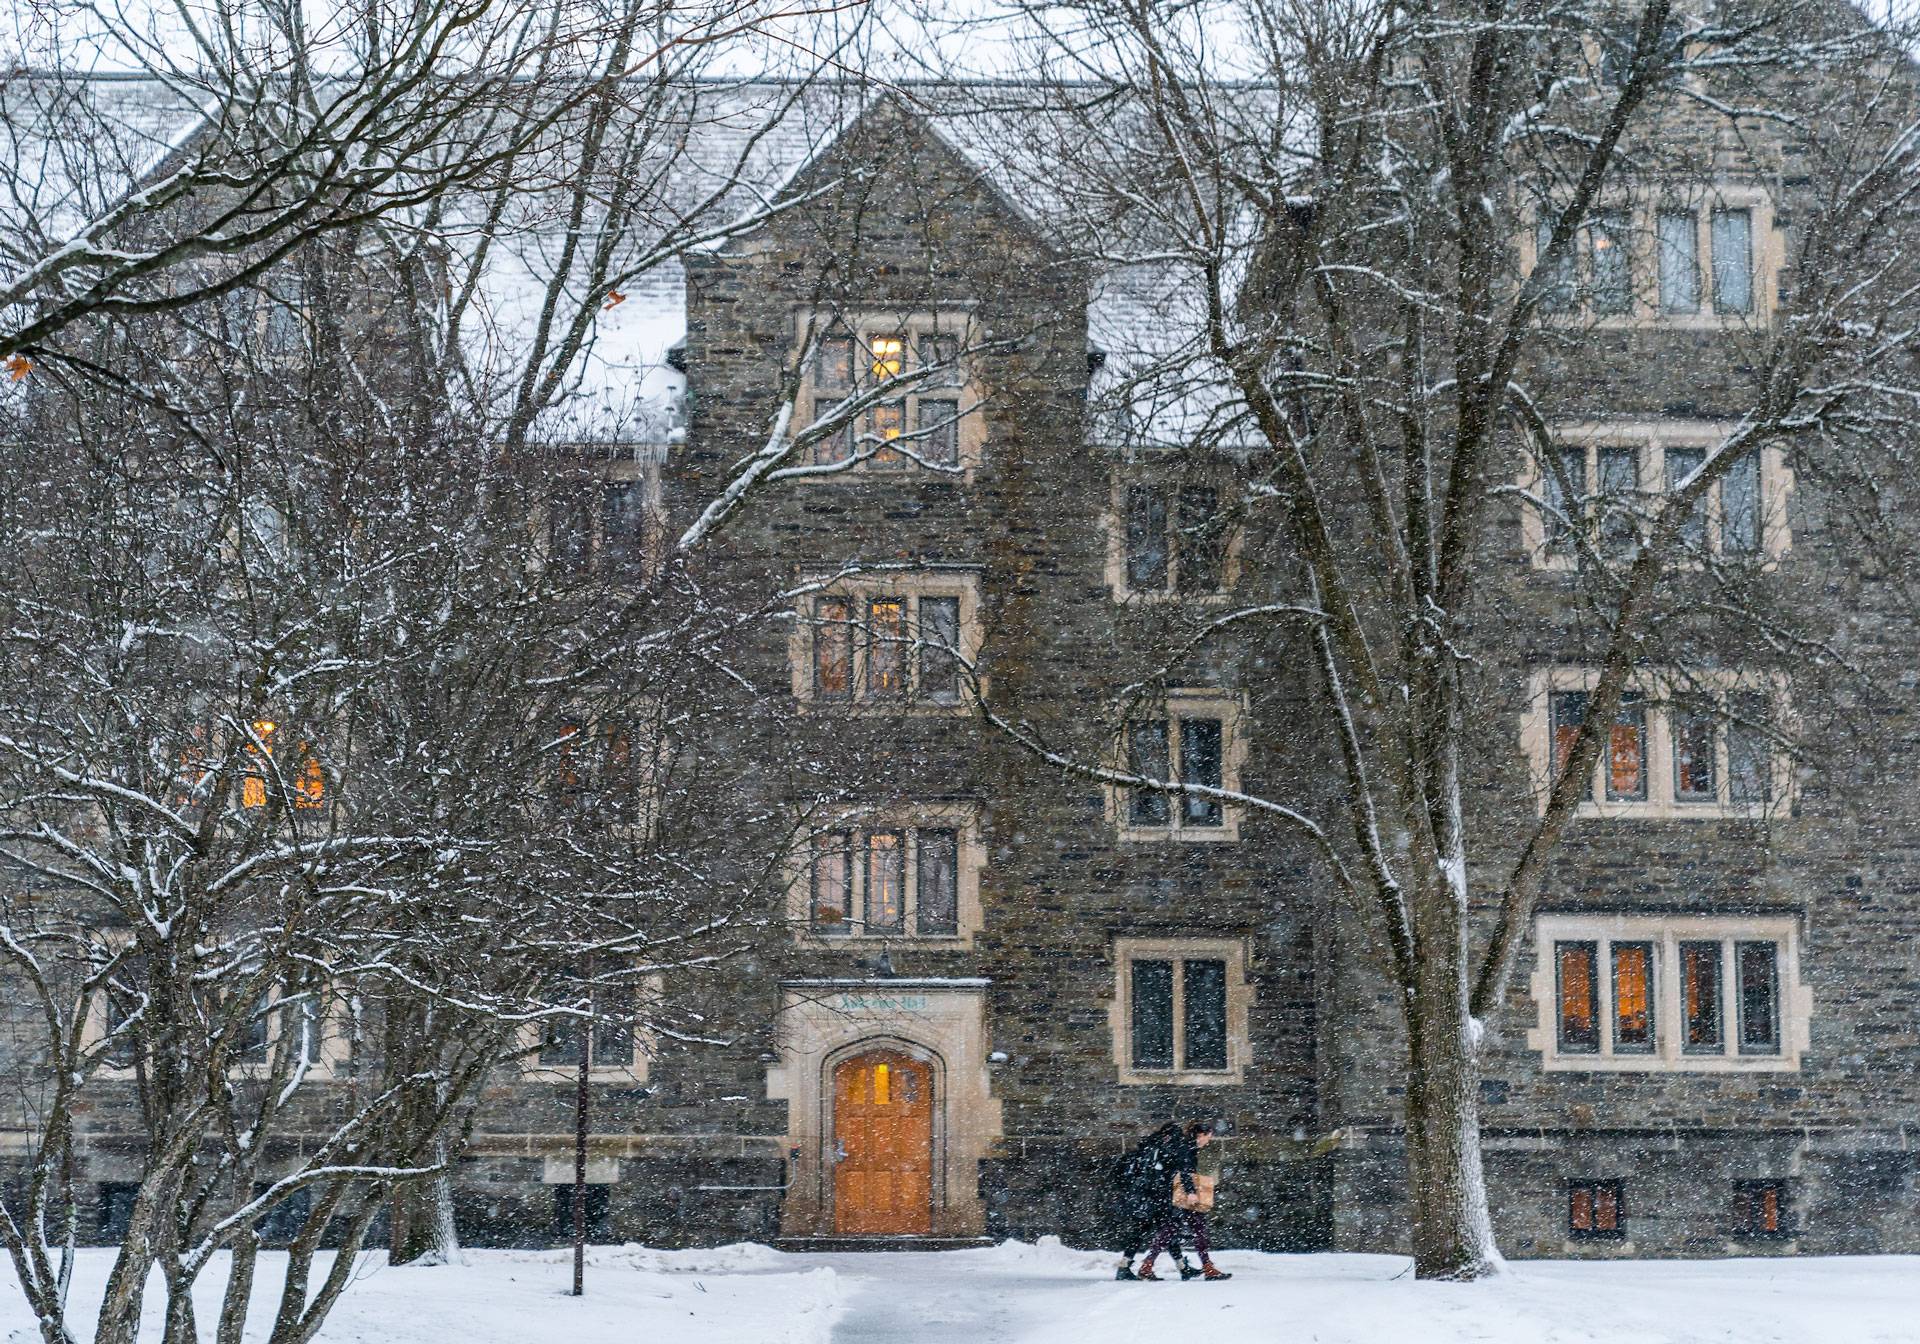 Two students, one carrying a cardboard box, walk during a snowfall in front of Andrews Hall, a stone building with five stories and multiple roof peaks